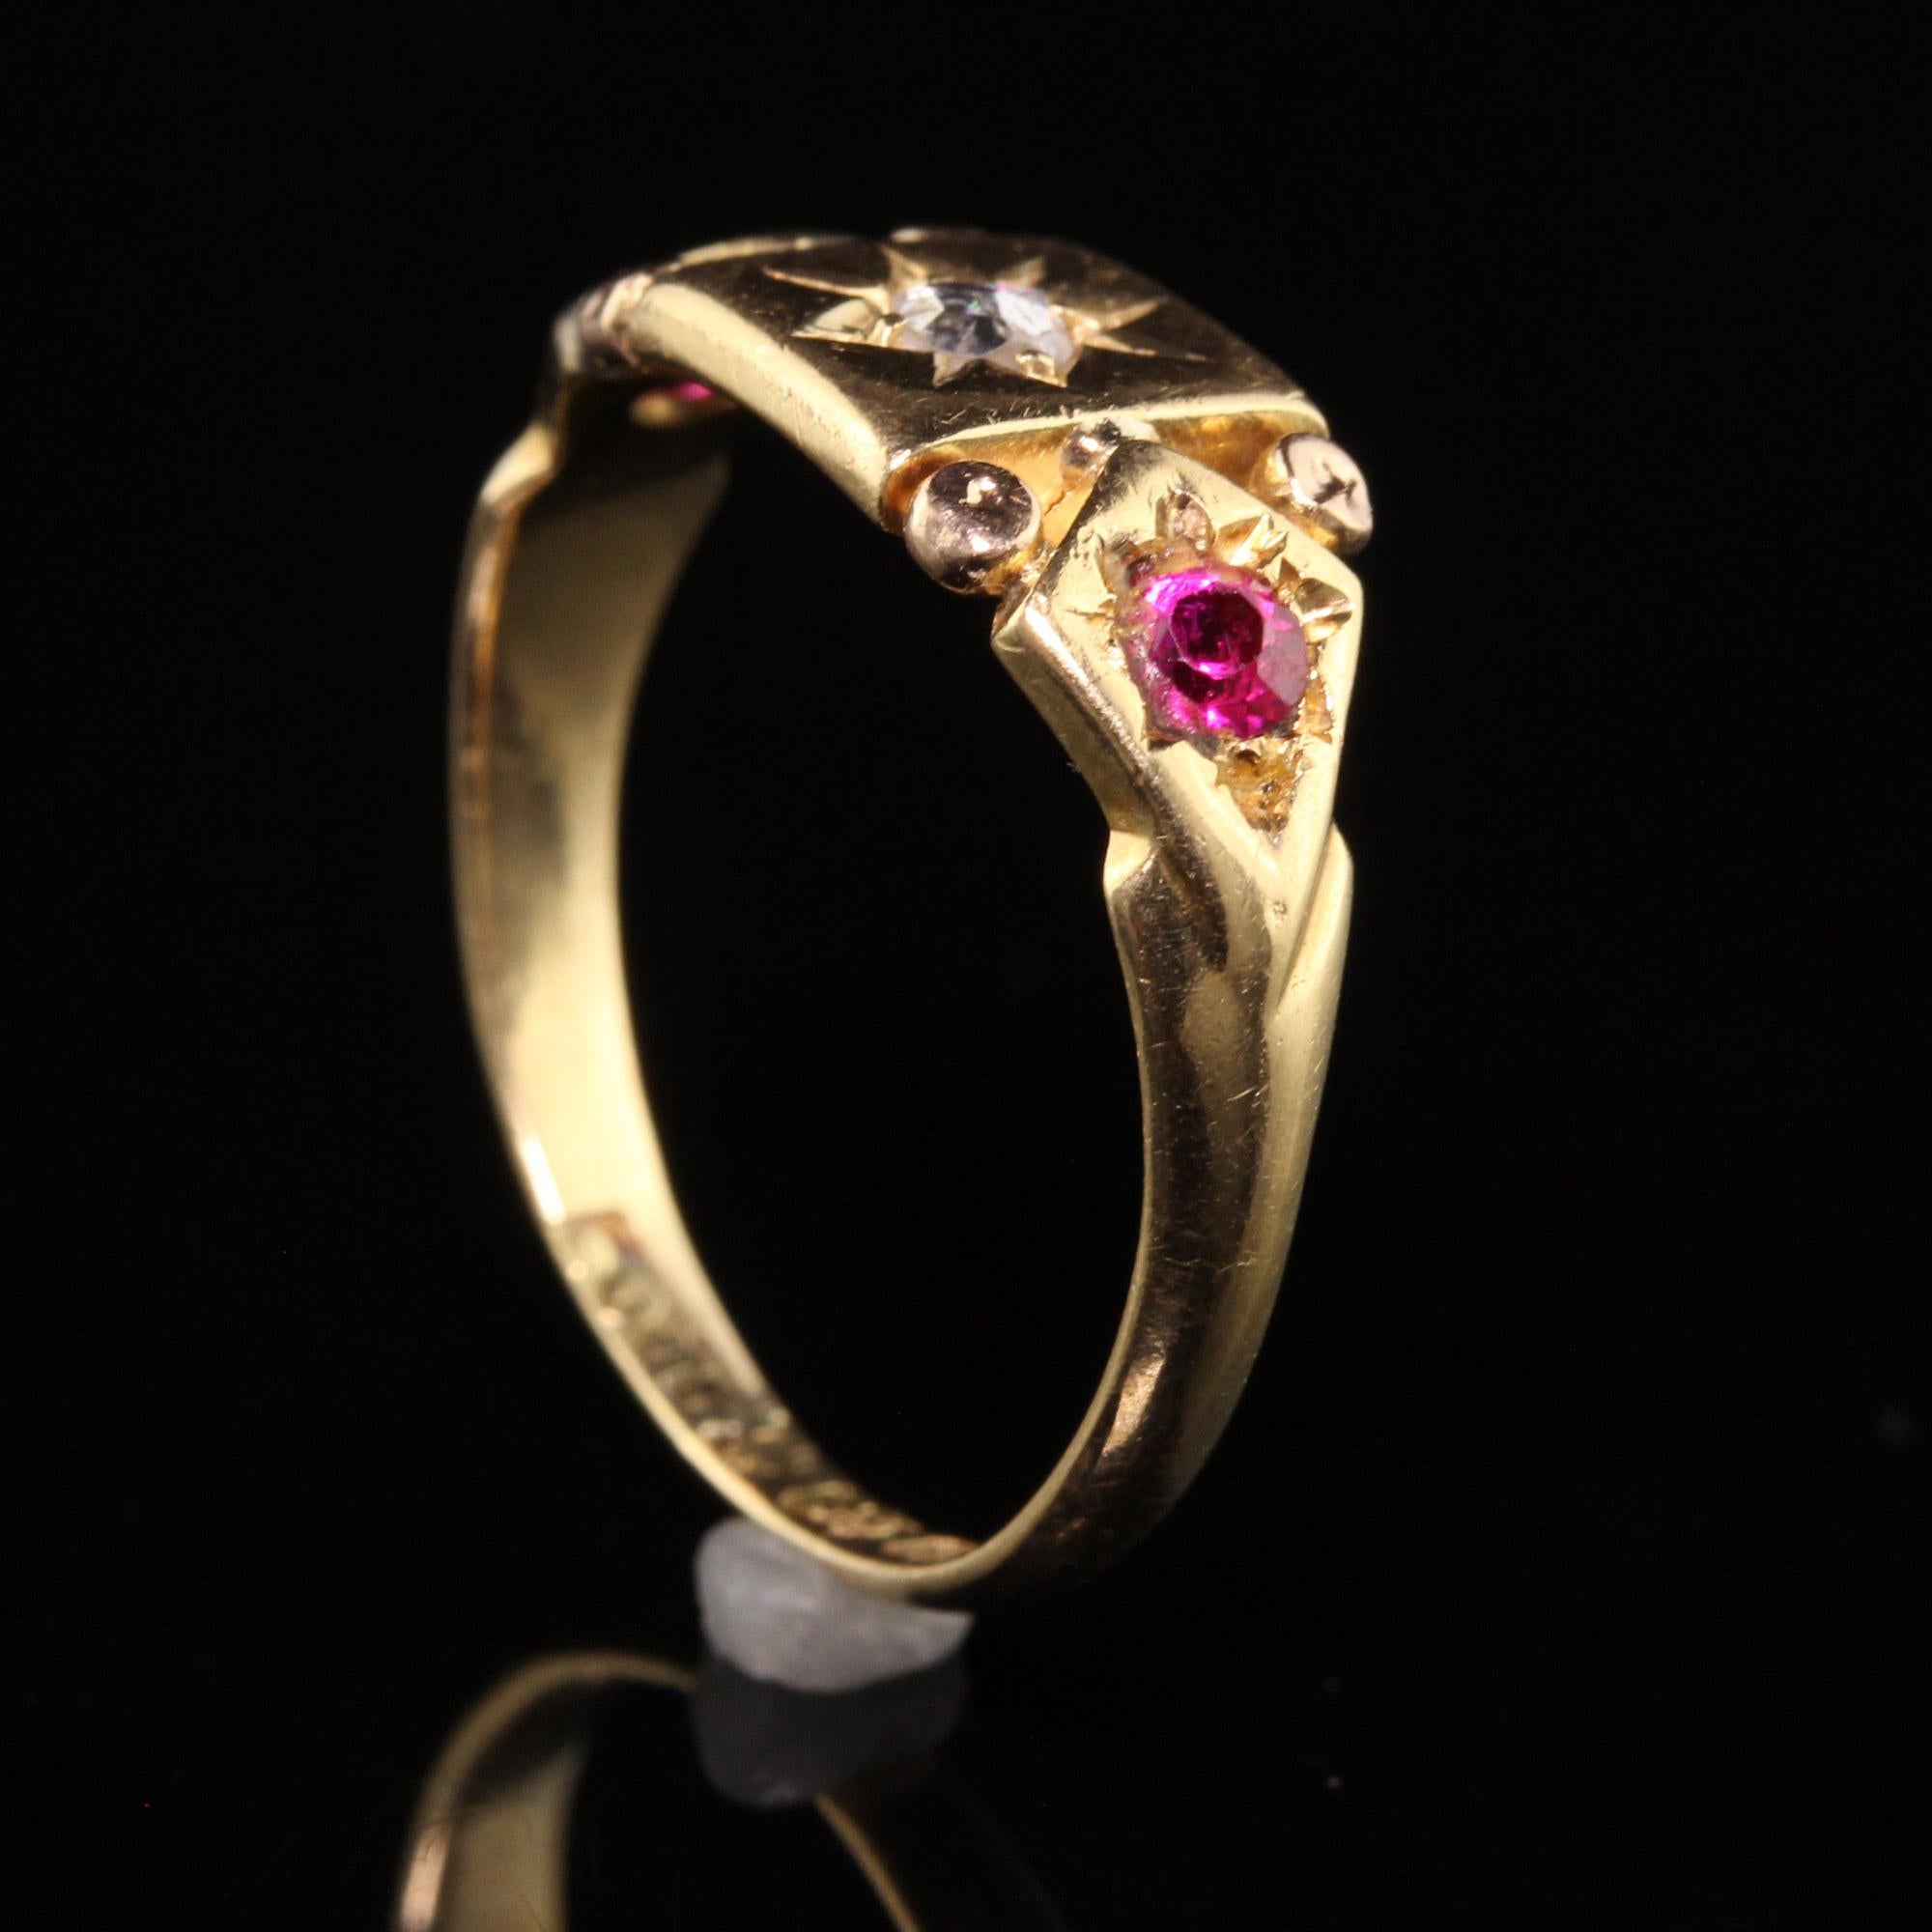 Antique Victorian English 18K Yellow Gold Rose Cut Diamond and Ruby Ring In Good Condition For Sale In Great Neck, NY